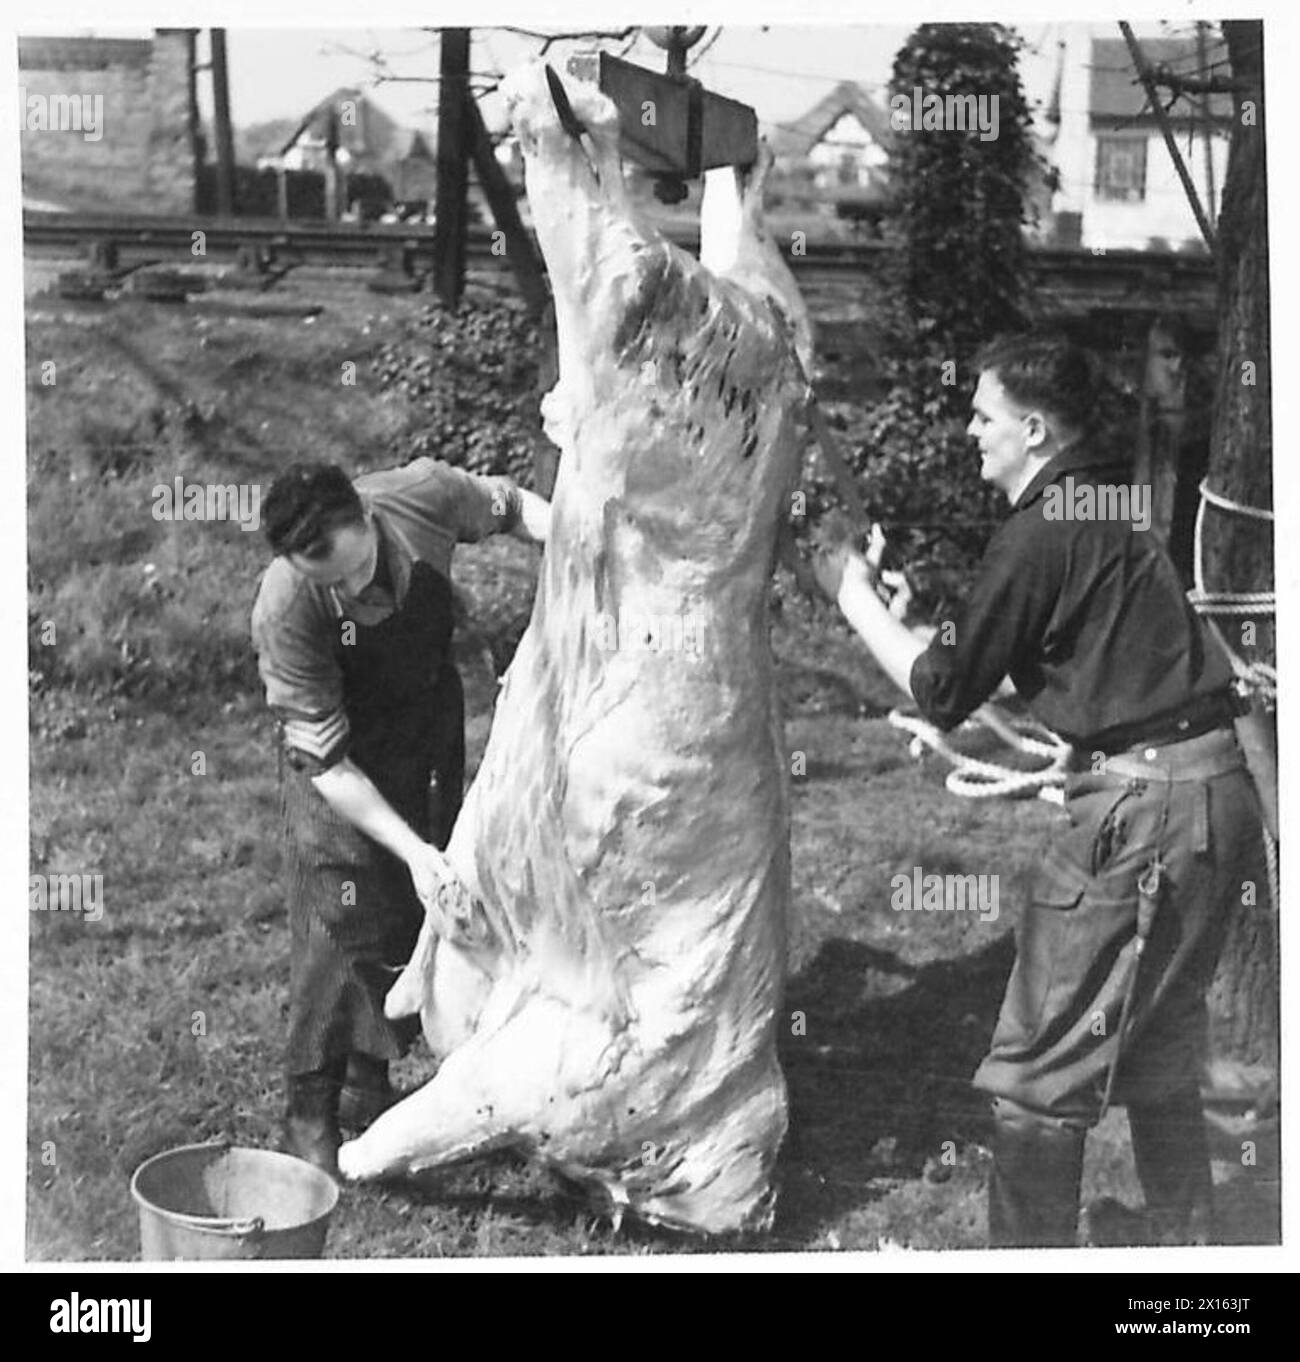 FIELD BUTCHERY IN THE ARMY - The carcase hailing from a tree, it is cleaned and sawn in two by Army personnel British Army Stock Photo